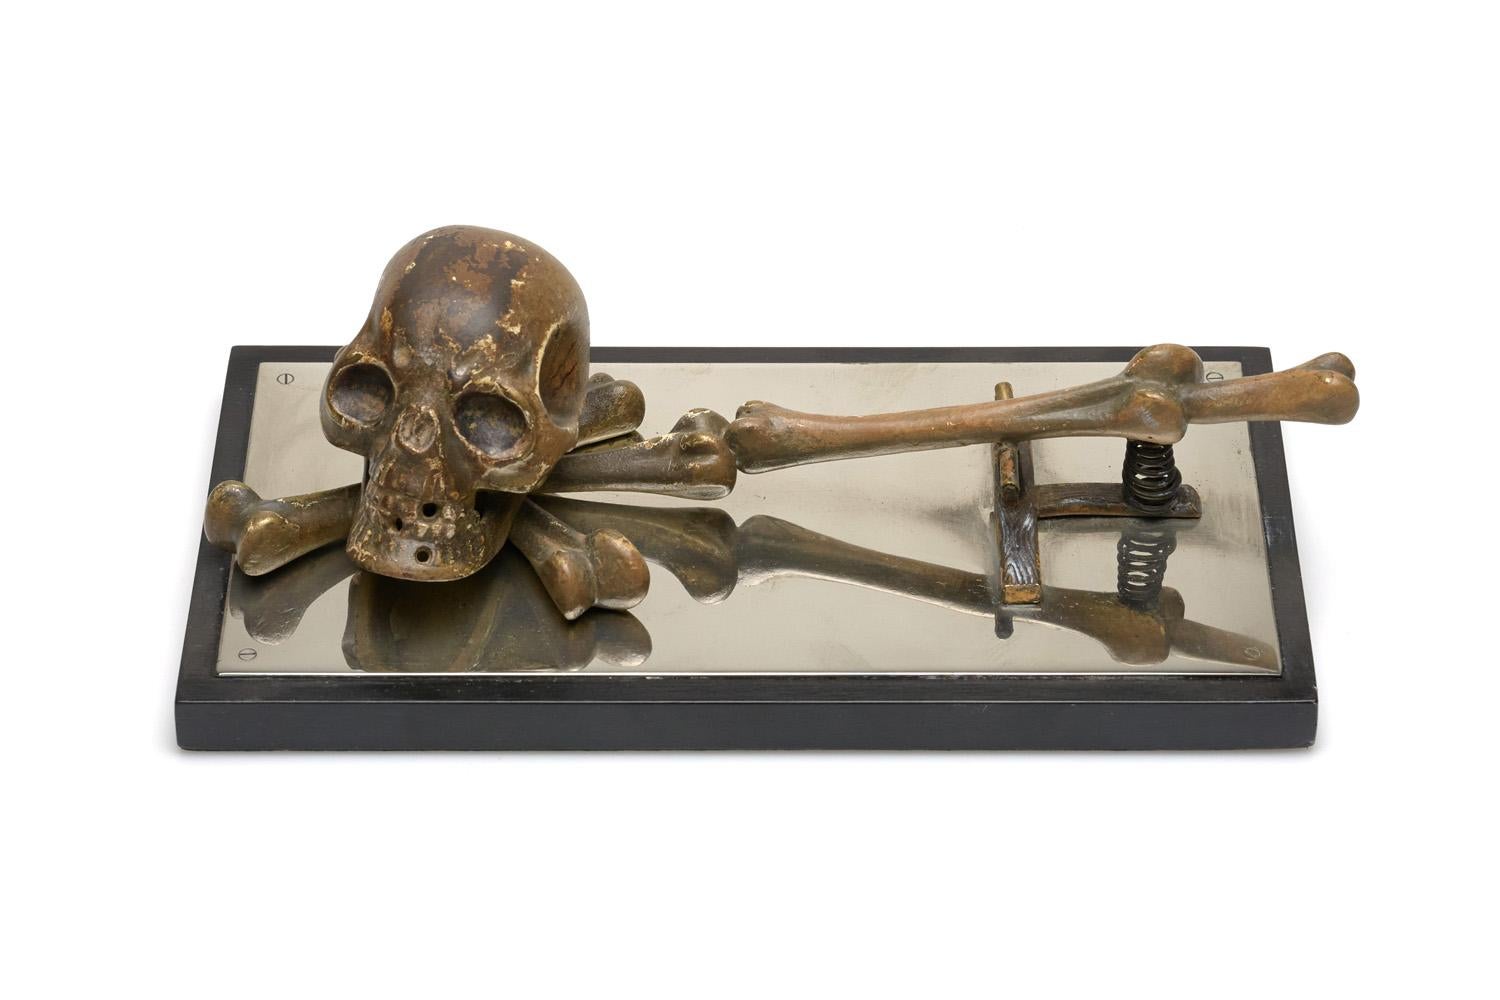 An Austrian bronze desk clip, featuring a large skull and crossbones mounted on wood base with nickel surface.
Early 20th century.
Measures: 8